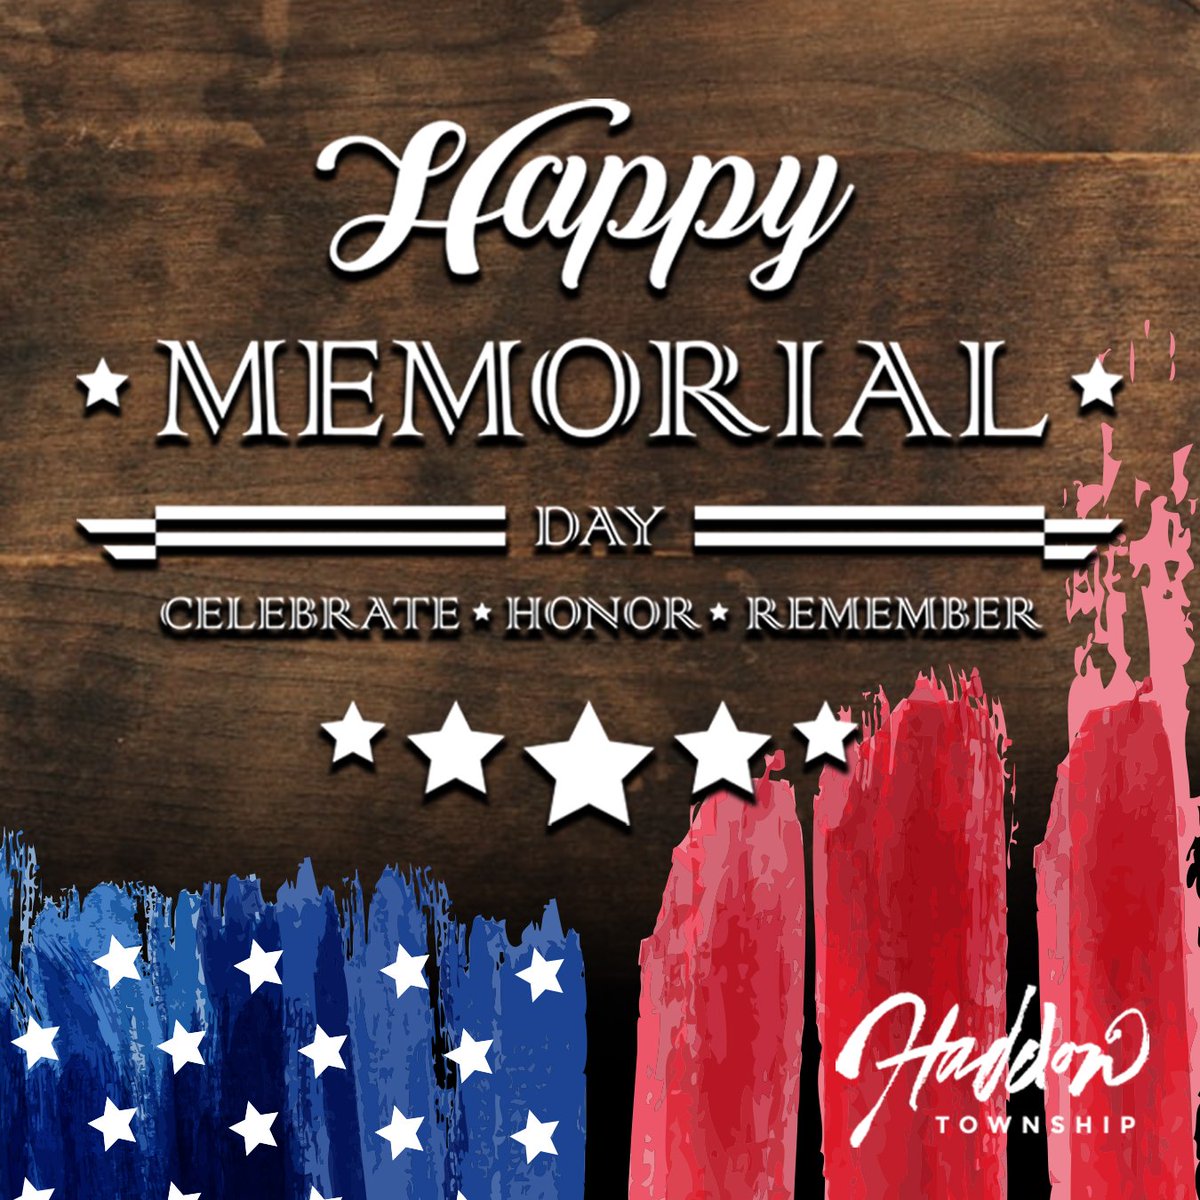 On Memorial Day and every day, we remember and honor all who serve our country. Join Haddon Township officials today at 10 a.m. for a Memorial Day Service at the Westmont Fire Company No. 1. #MemorialDay